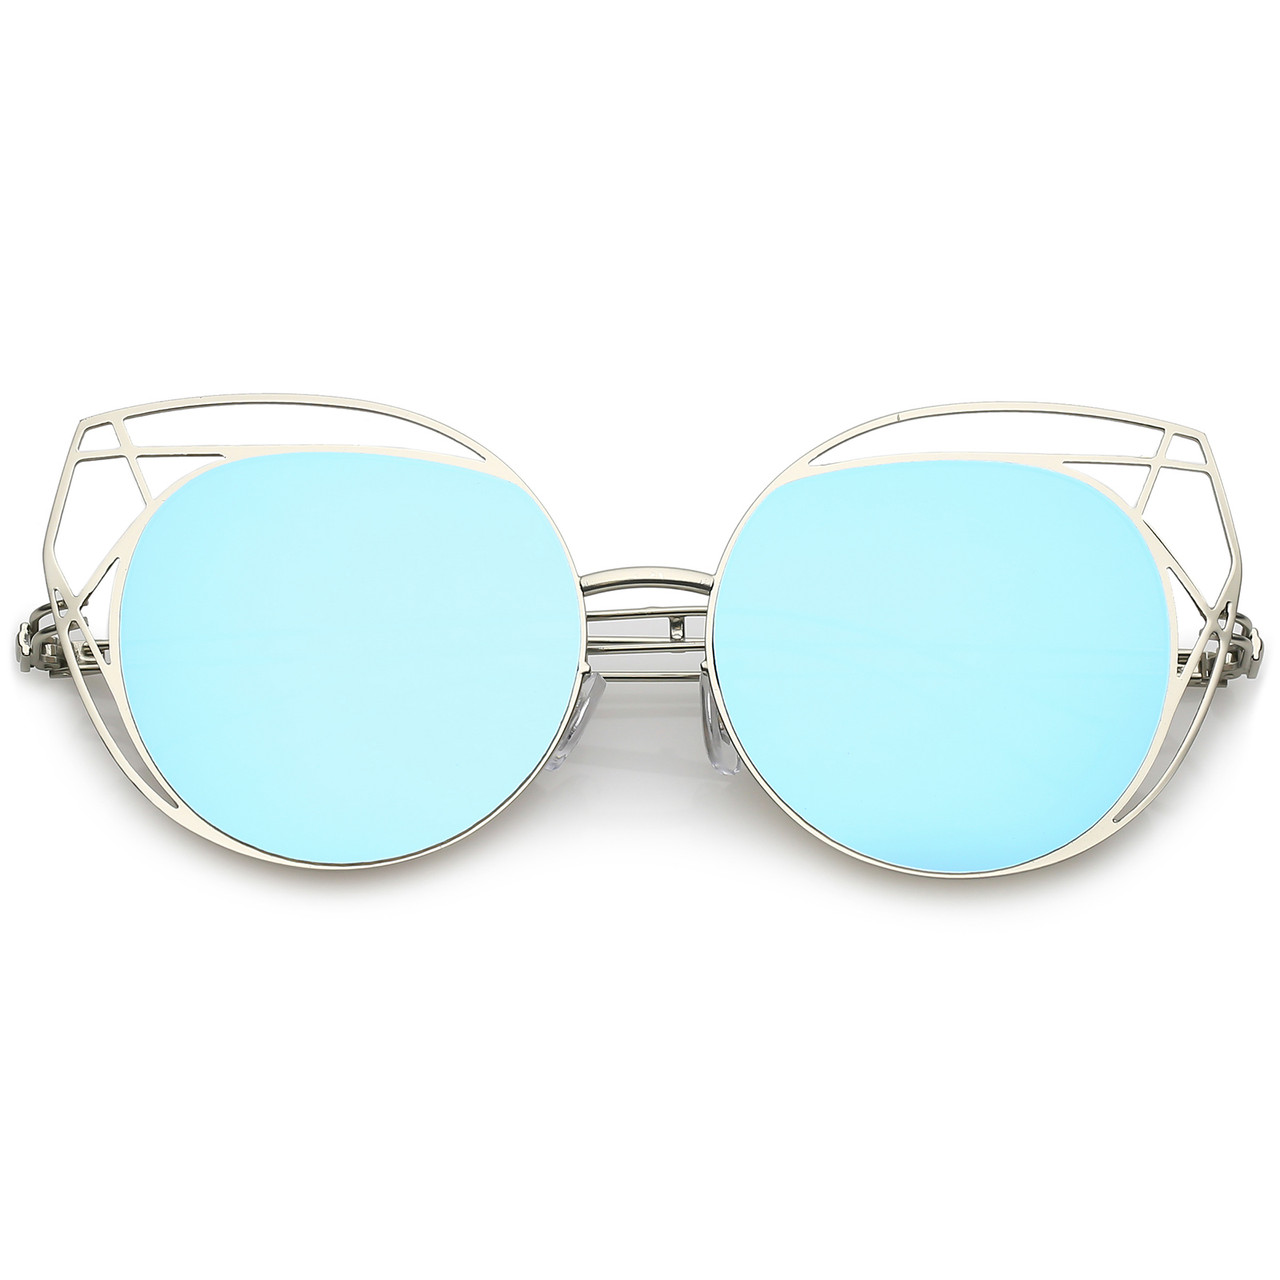 Celebrity Round Mirror Sunglasses For Men And Women-FunkyTradition